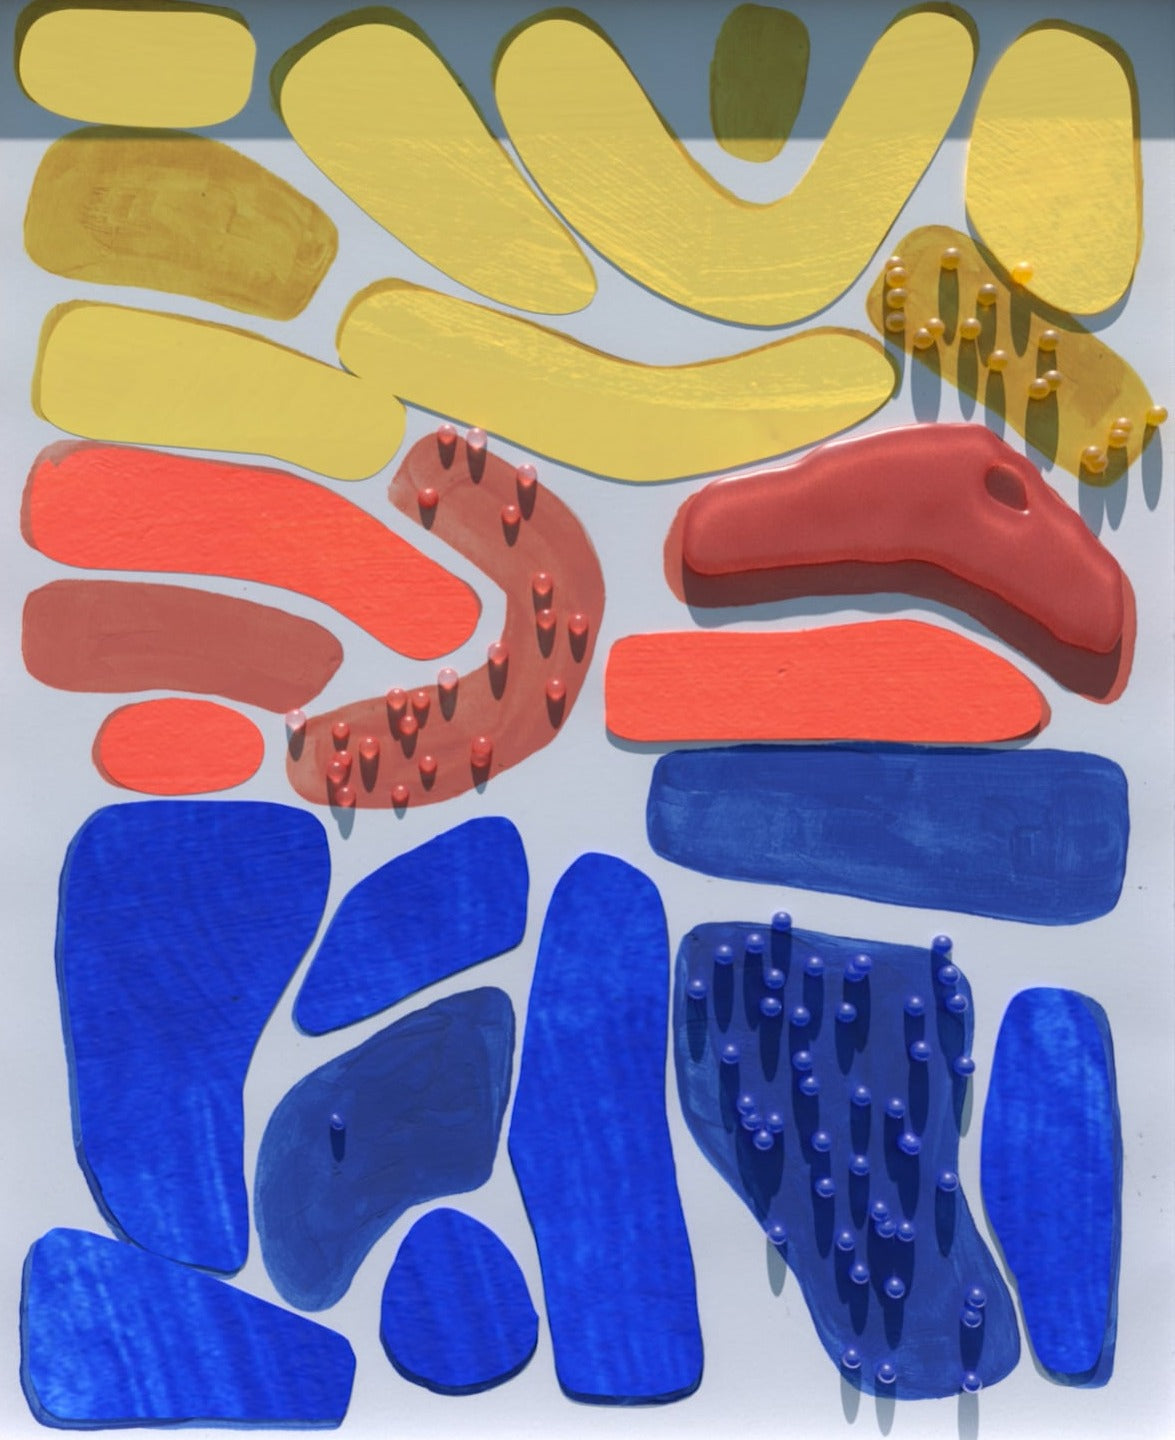 Thumbnail of video art showing an array of painted abstract shapes in bold yellow, red, and blue, with a playful touch of dripping paint